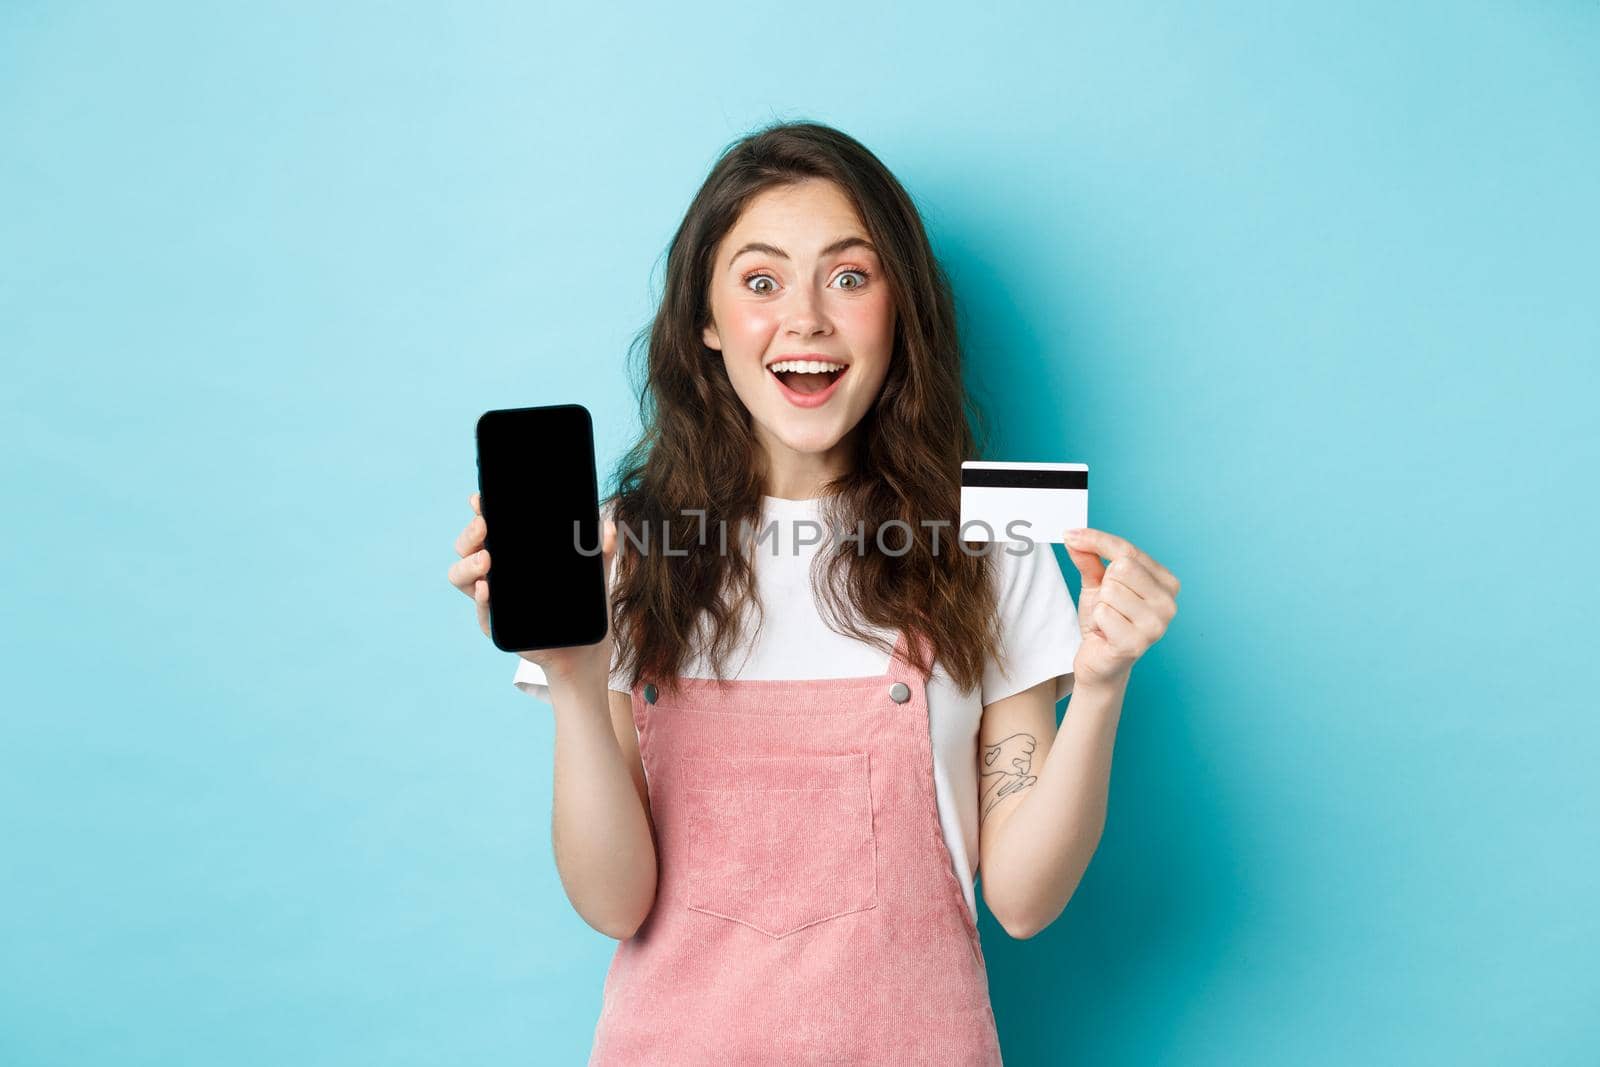 Look here. Excited young cute girl showing empty mobile screen and plastic credit card, look amazed at camera, standing over blue background.